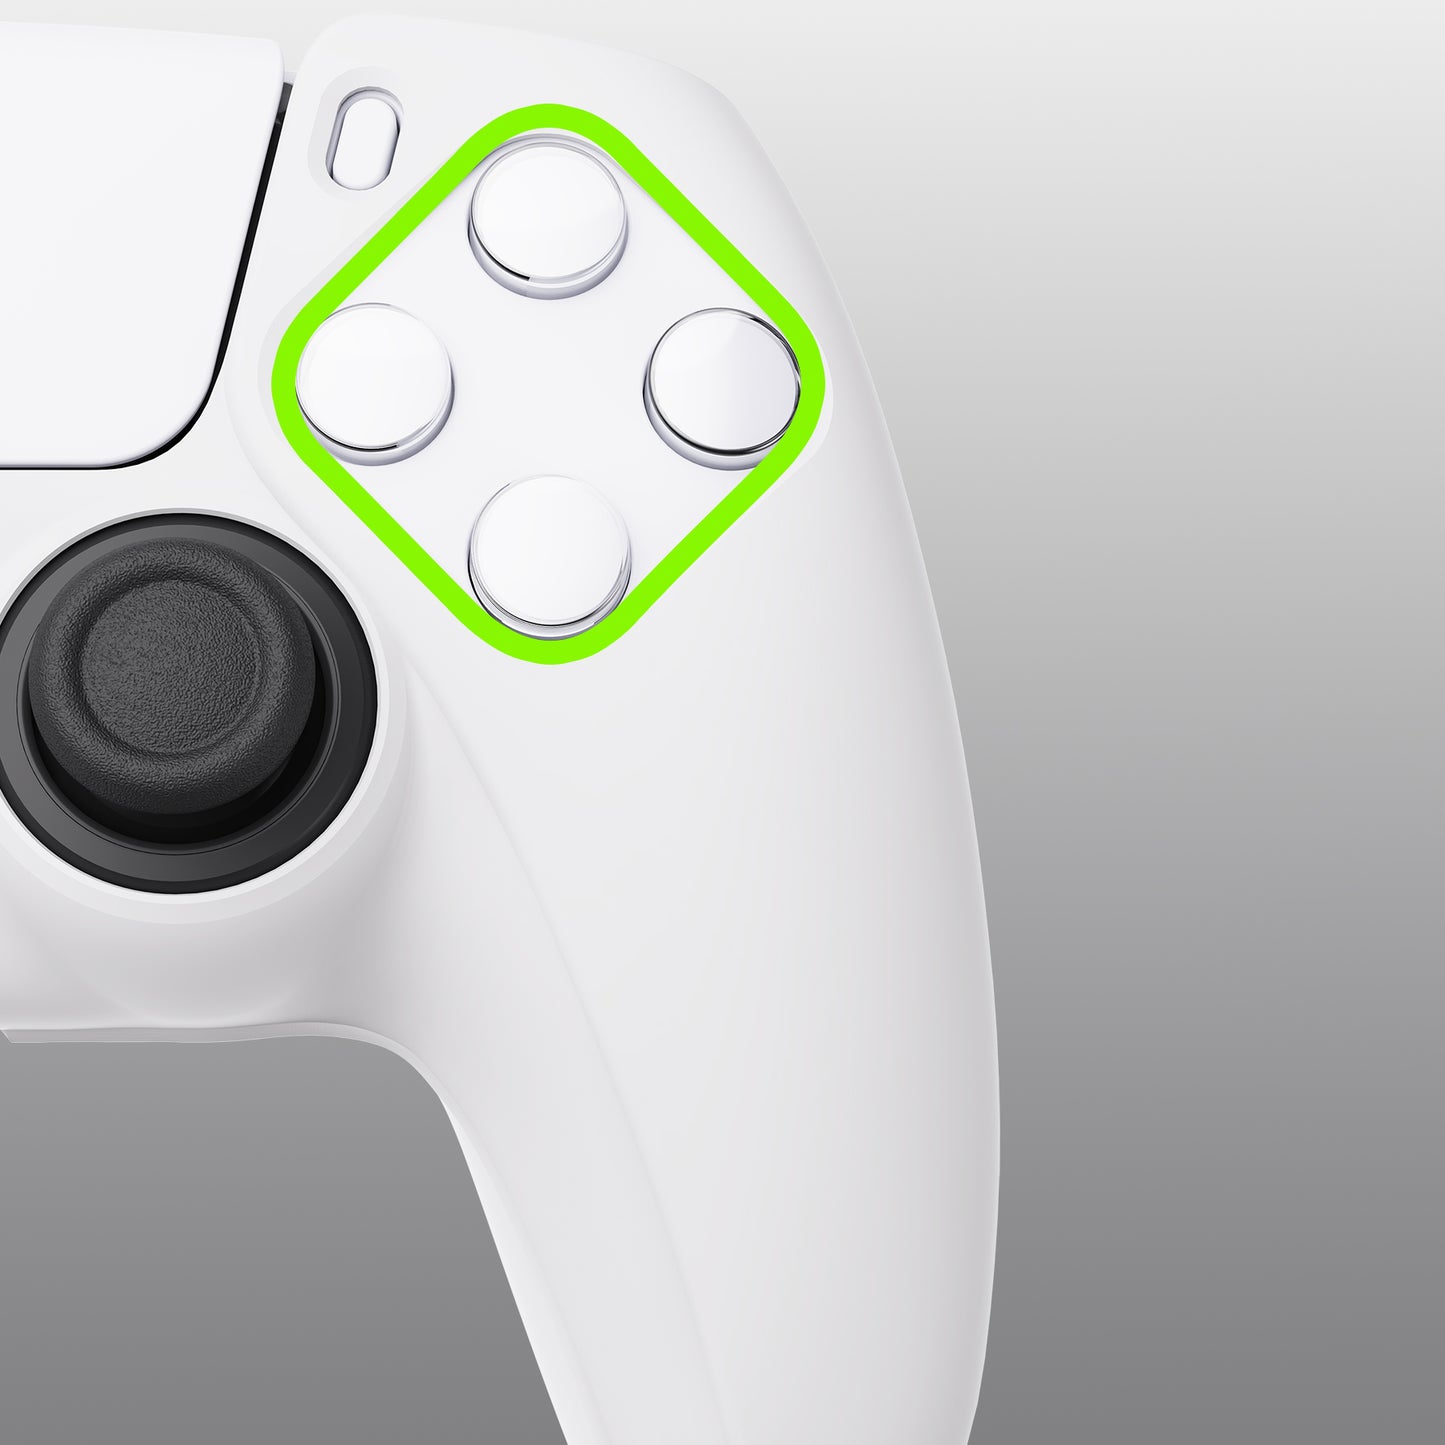 PlayVital Pure Series Anti-Slip Silicone Cover Skin with Thumb Grip Caps for PS5 Wireless Controller - White - KOPF002 PlayVital